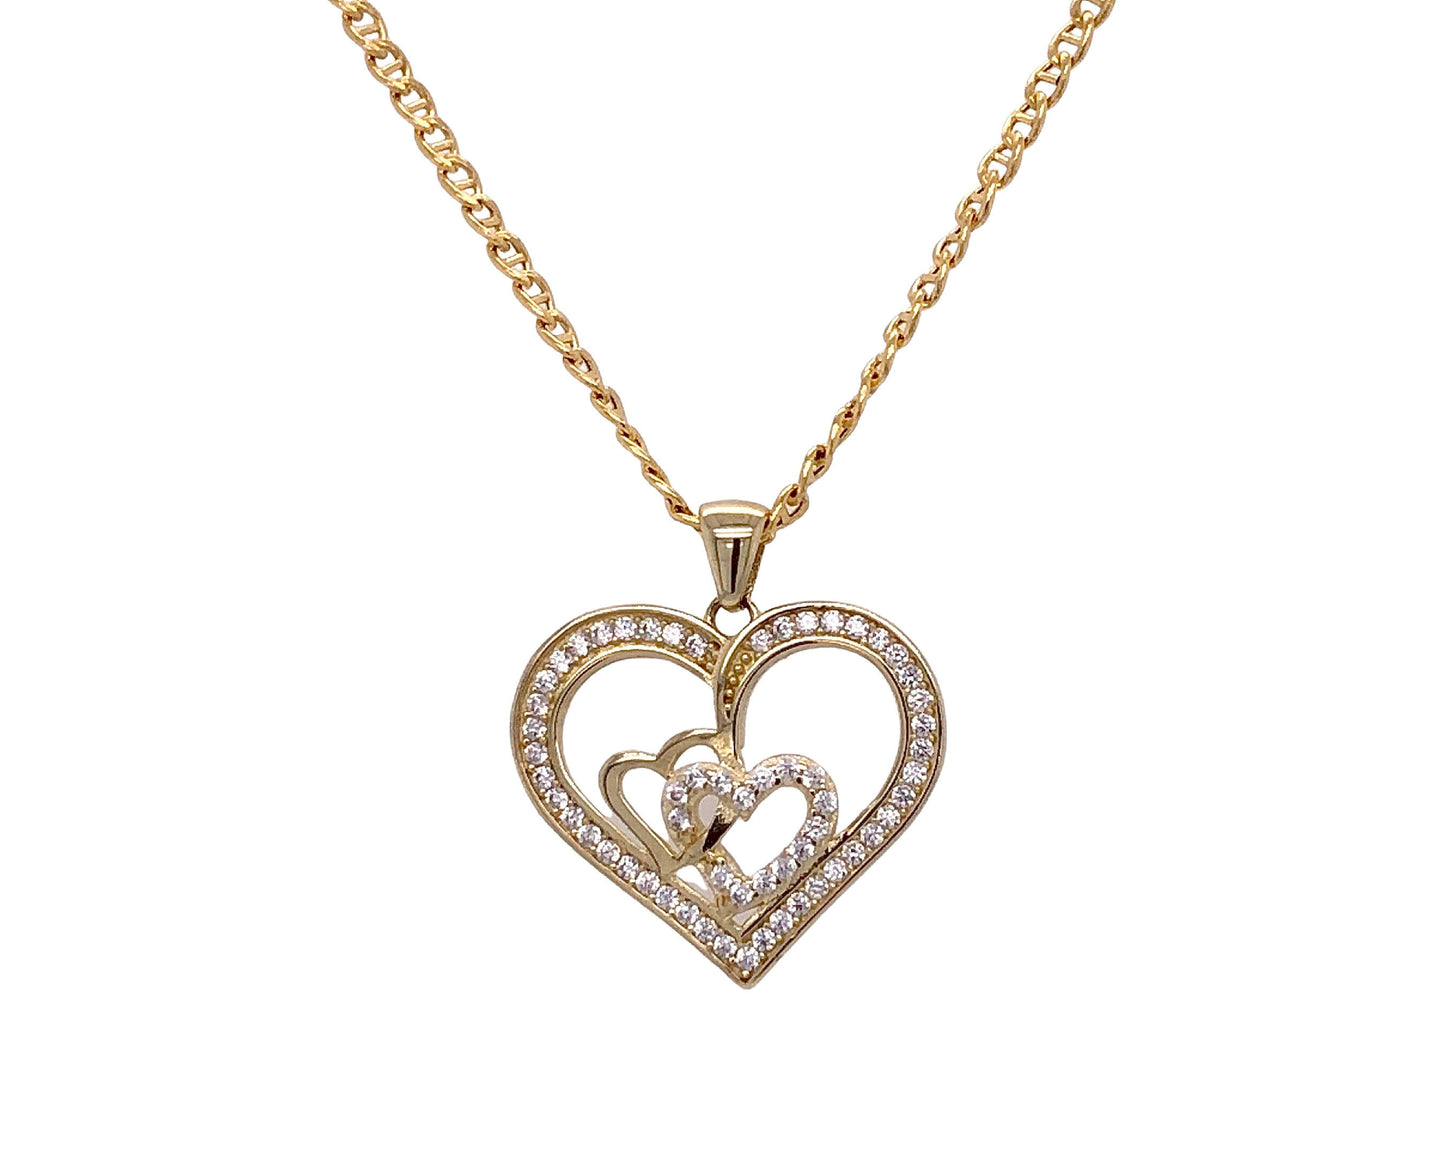 celebrate love by gifting her a heart necklace 